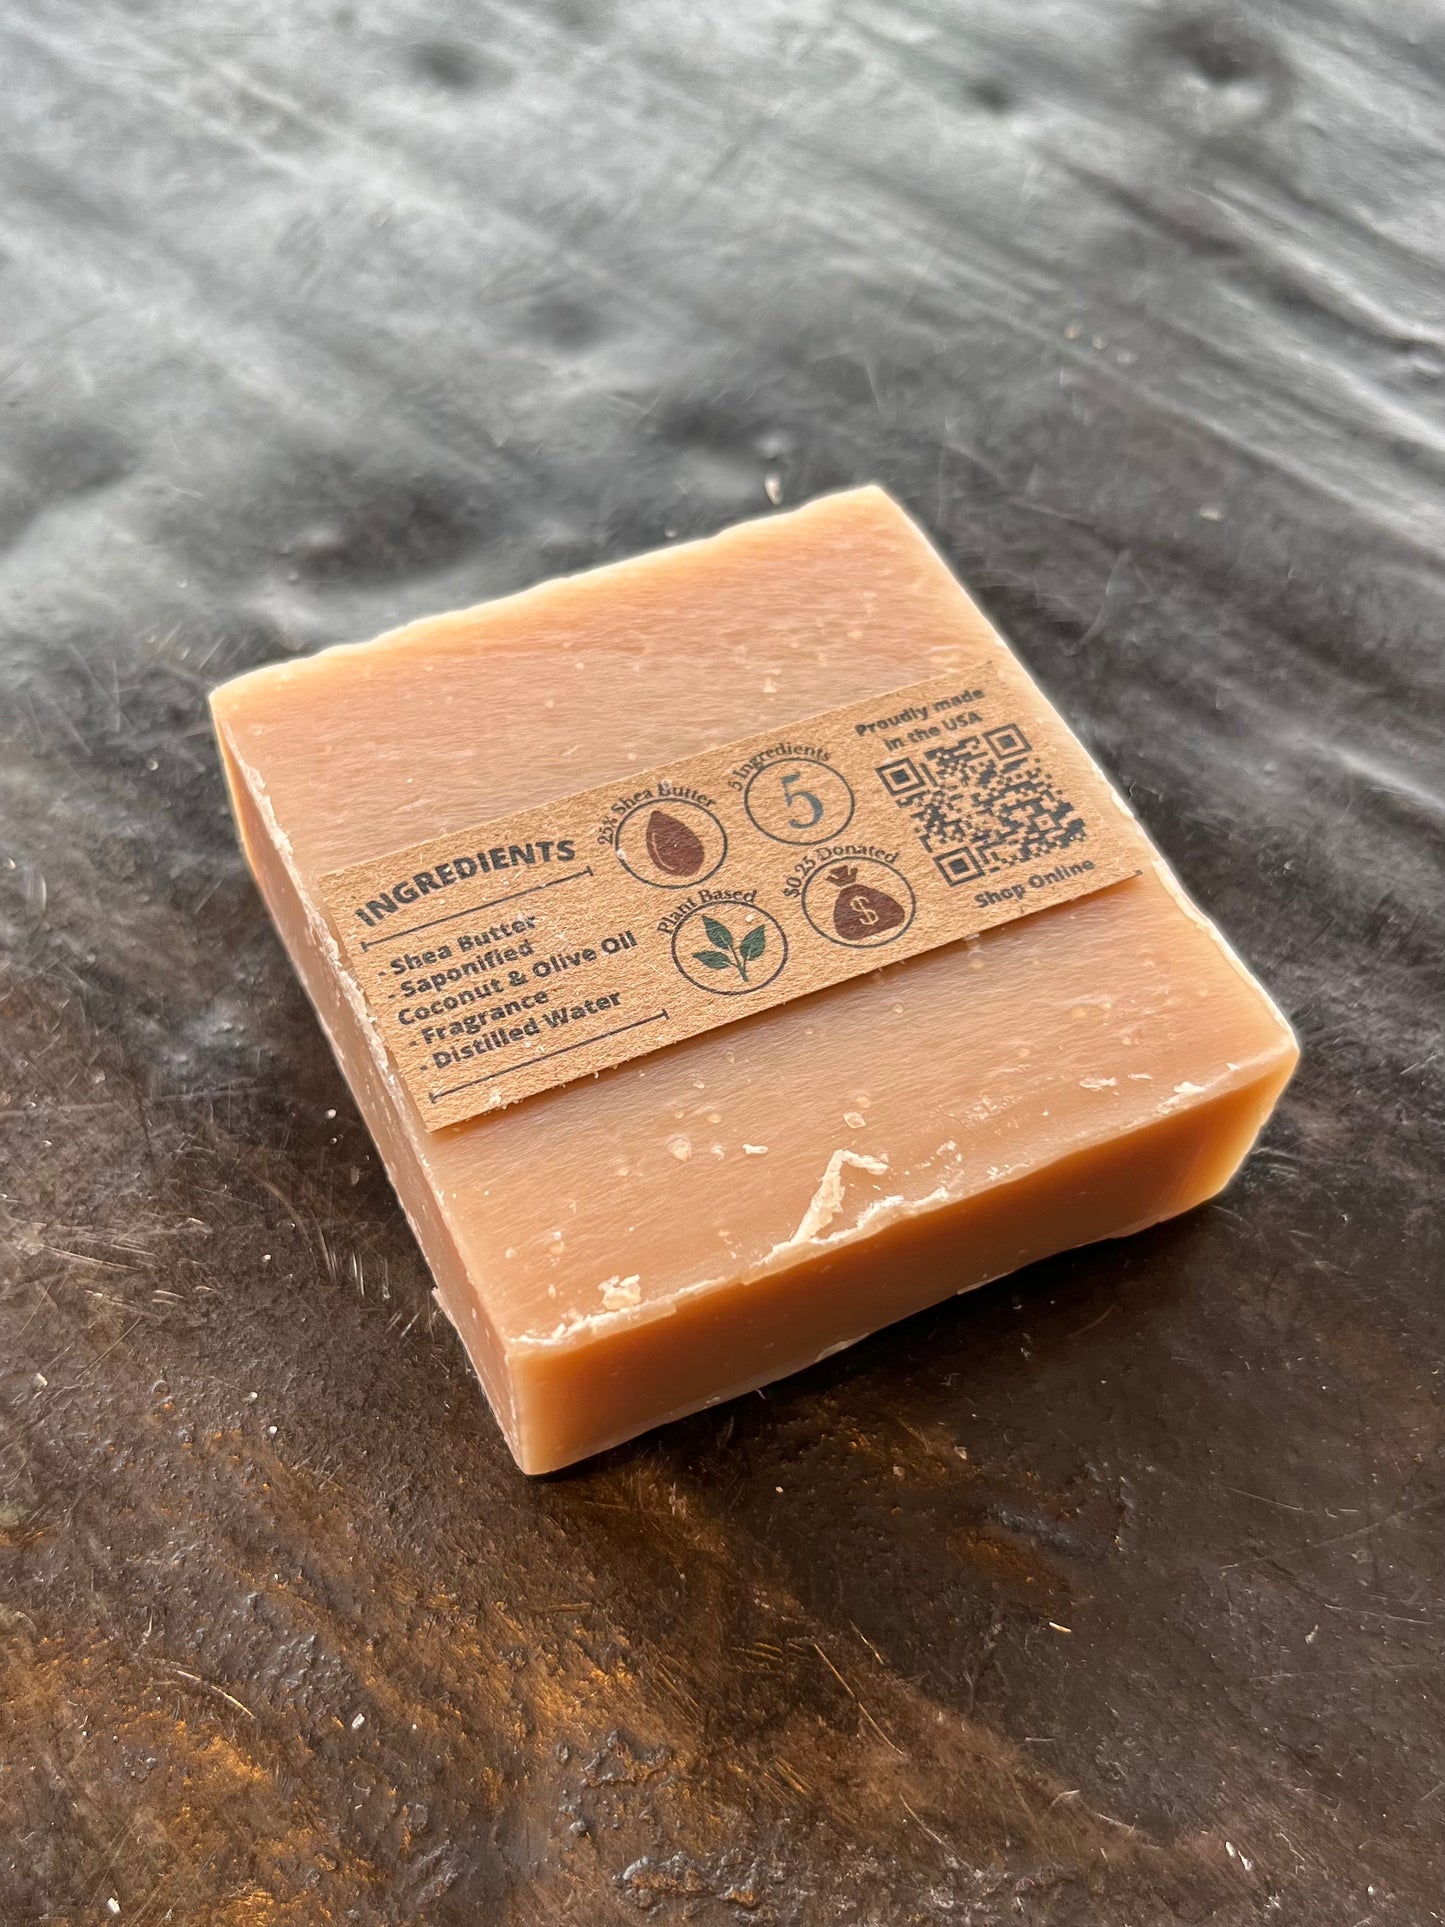 Cleanly Cashmere Bar Soap